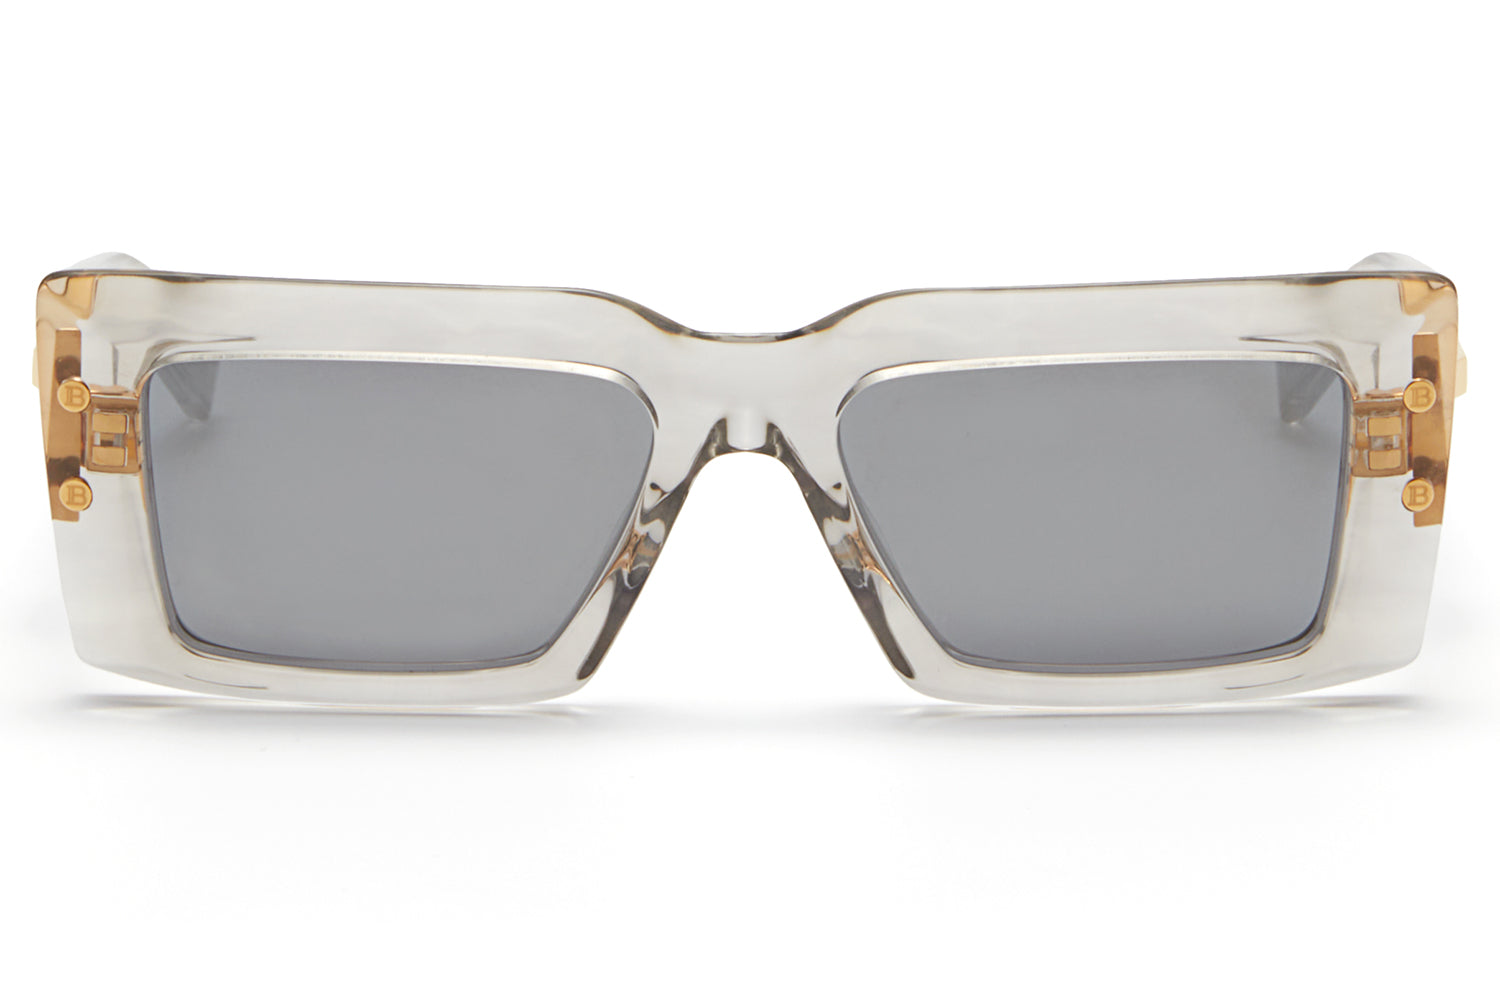 Balmain Eyewear - Imperial Sunglasses | Specs Collective, Grey Crystal with Gold Flakes & White Gold with Dark Grey - White Gold Flash Lenses